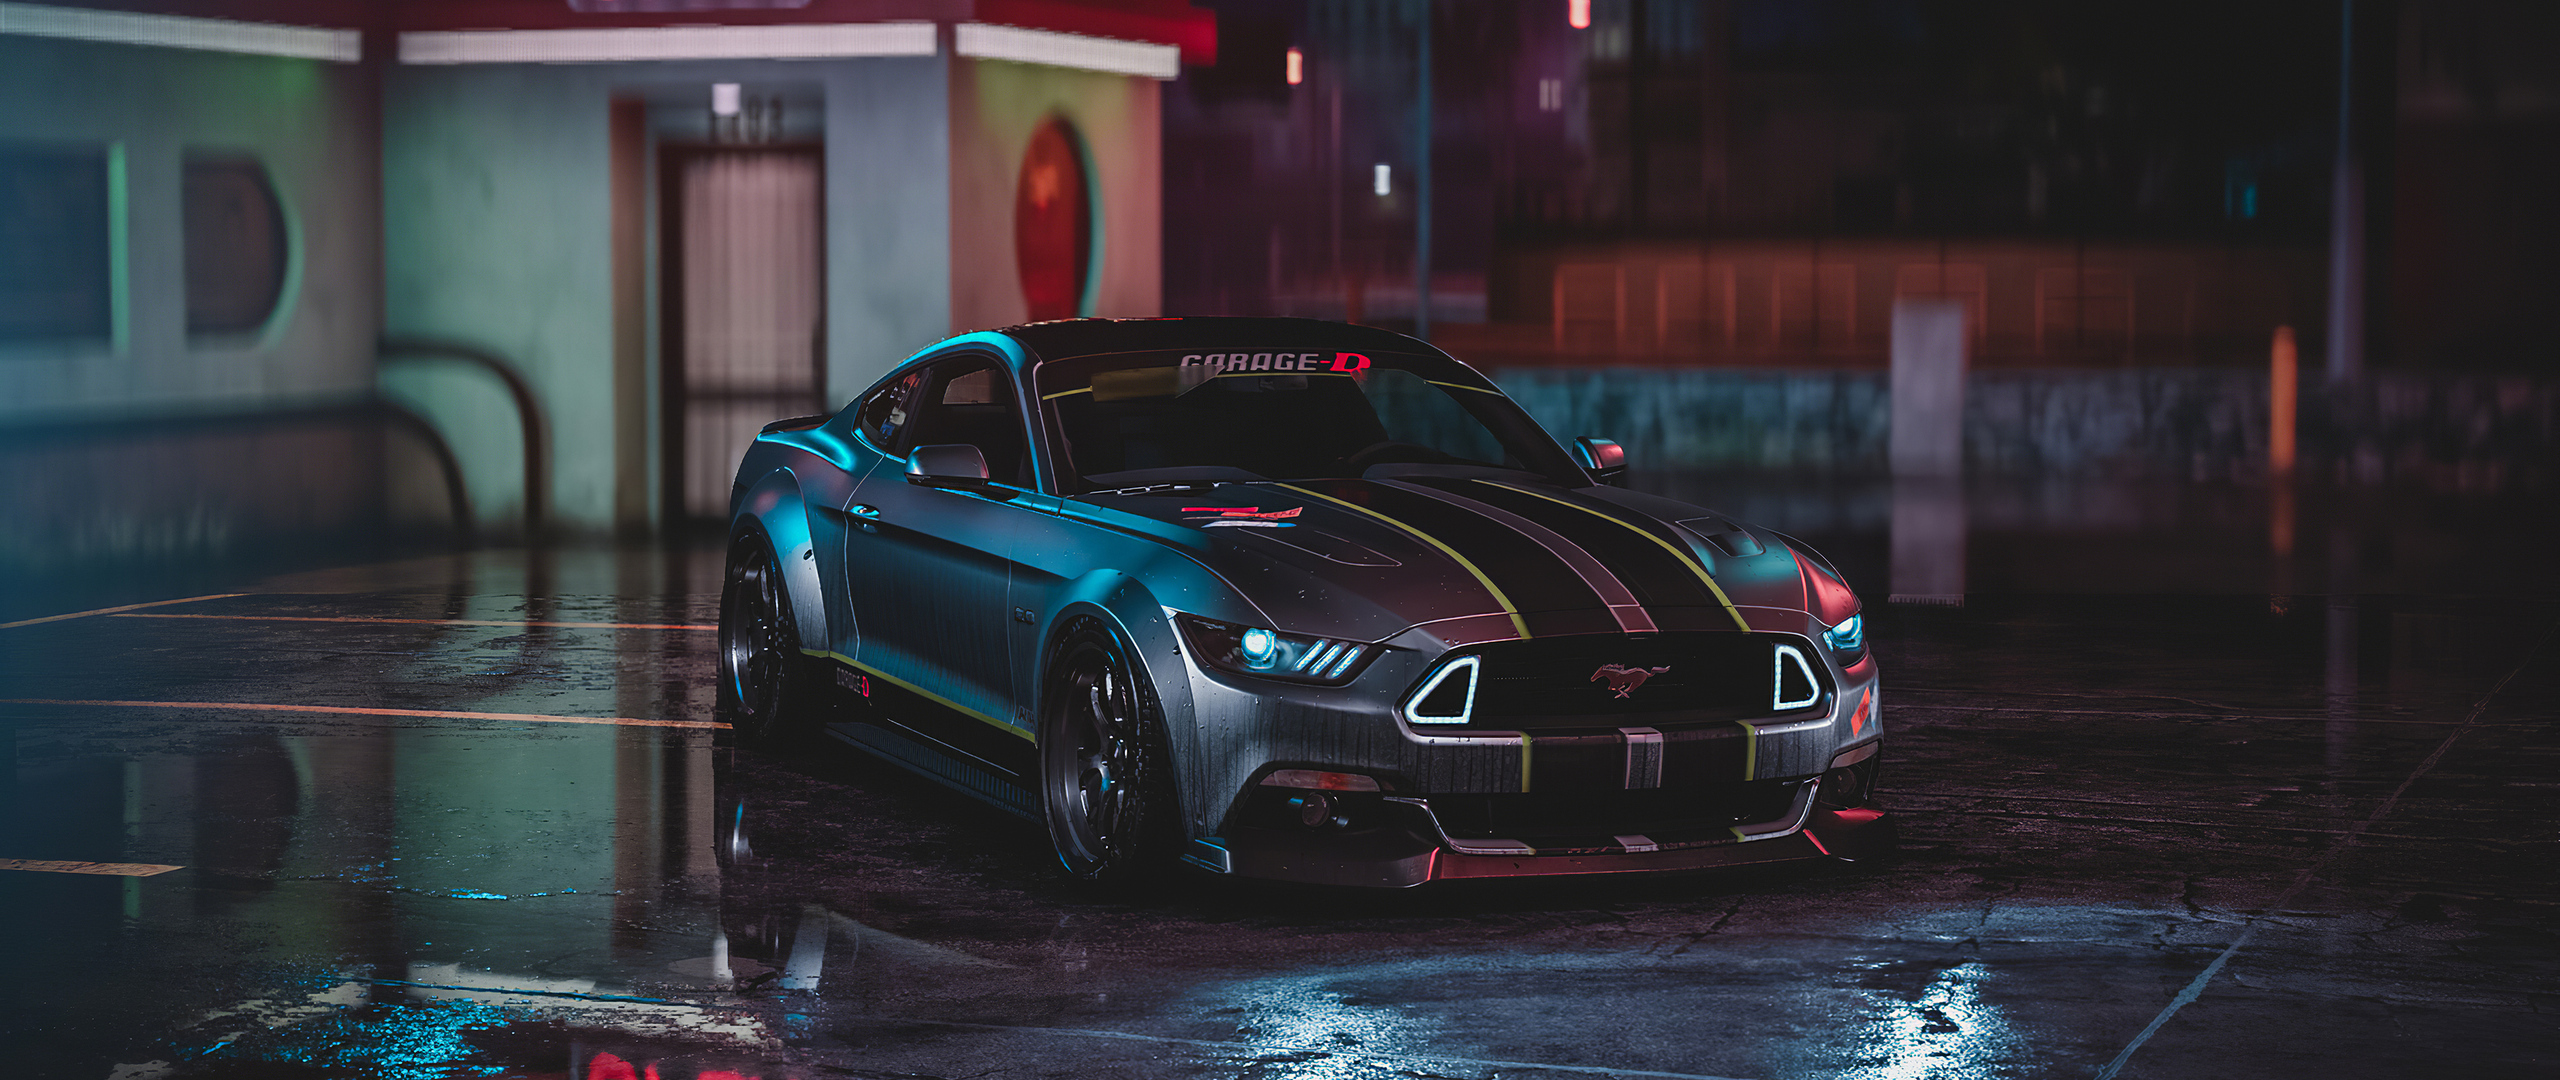 2560x1080 Ford Mustang Gt Neon Harmony 4k 2560x1080 ...